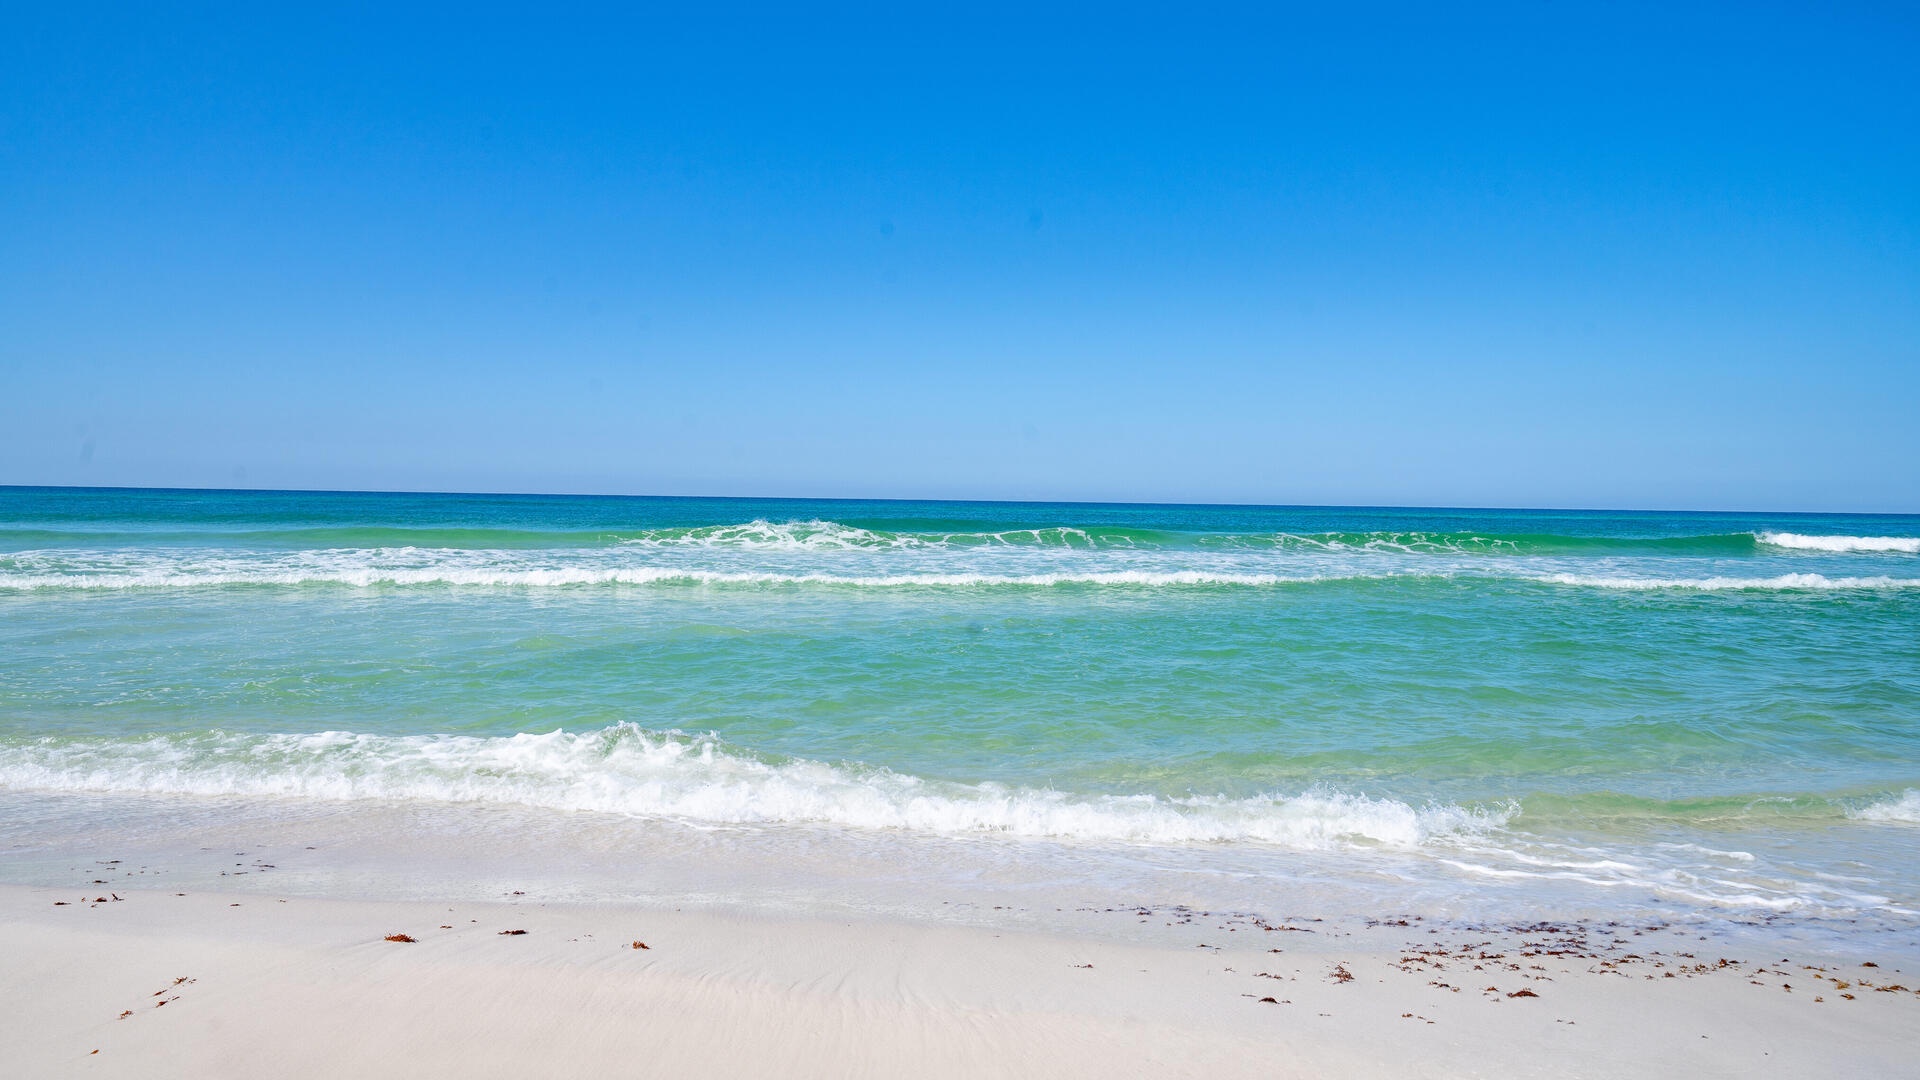 The emerald waters and sugar-white sands of the Gulf of Mexico!